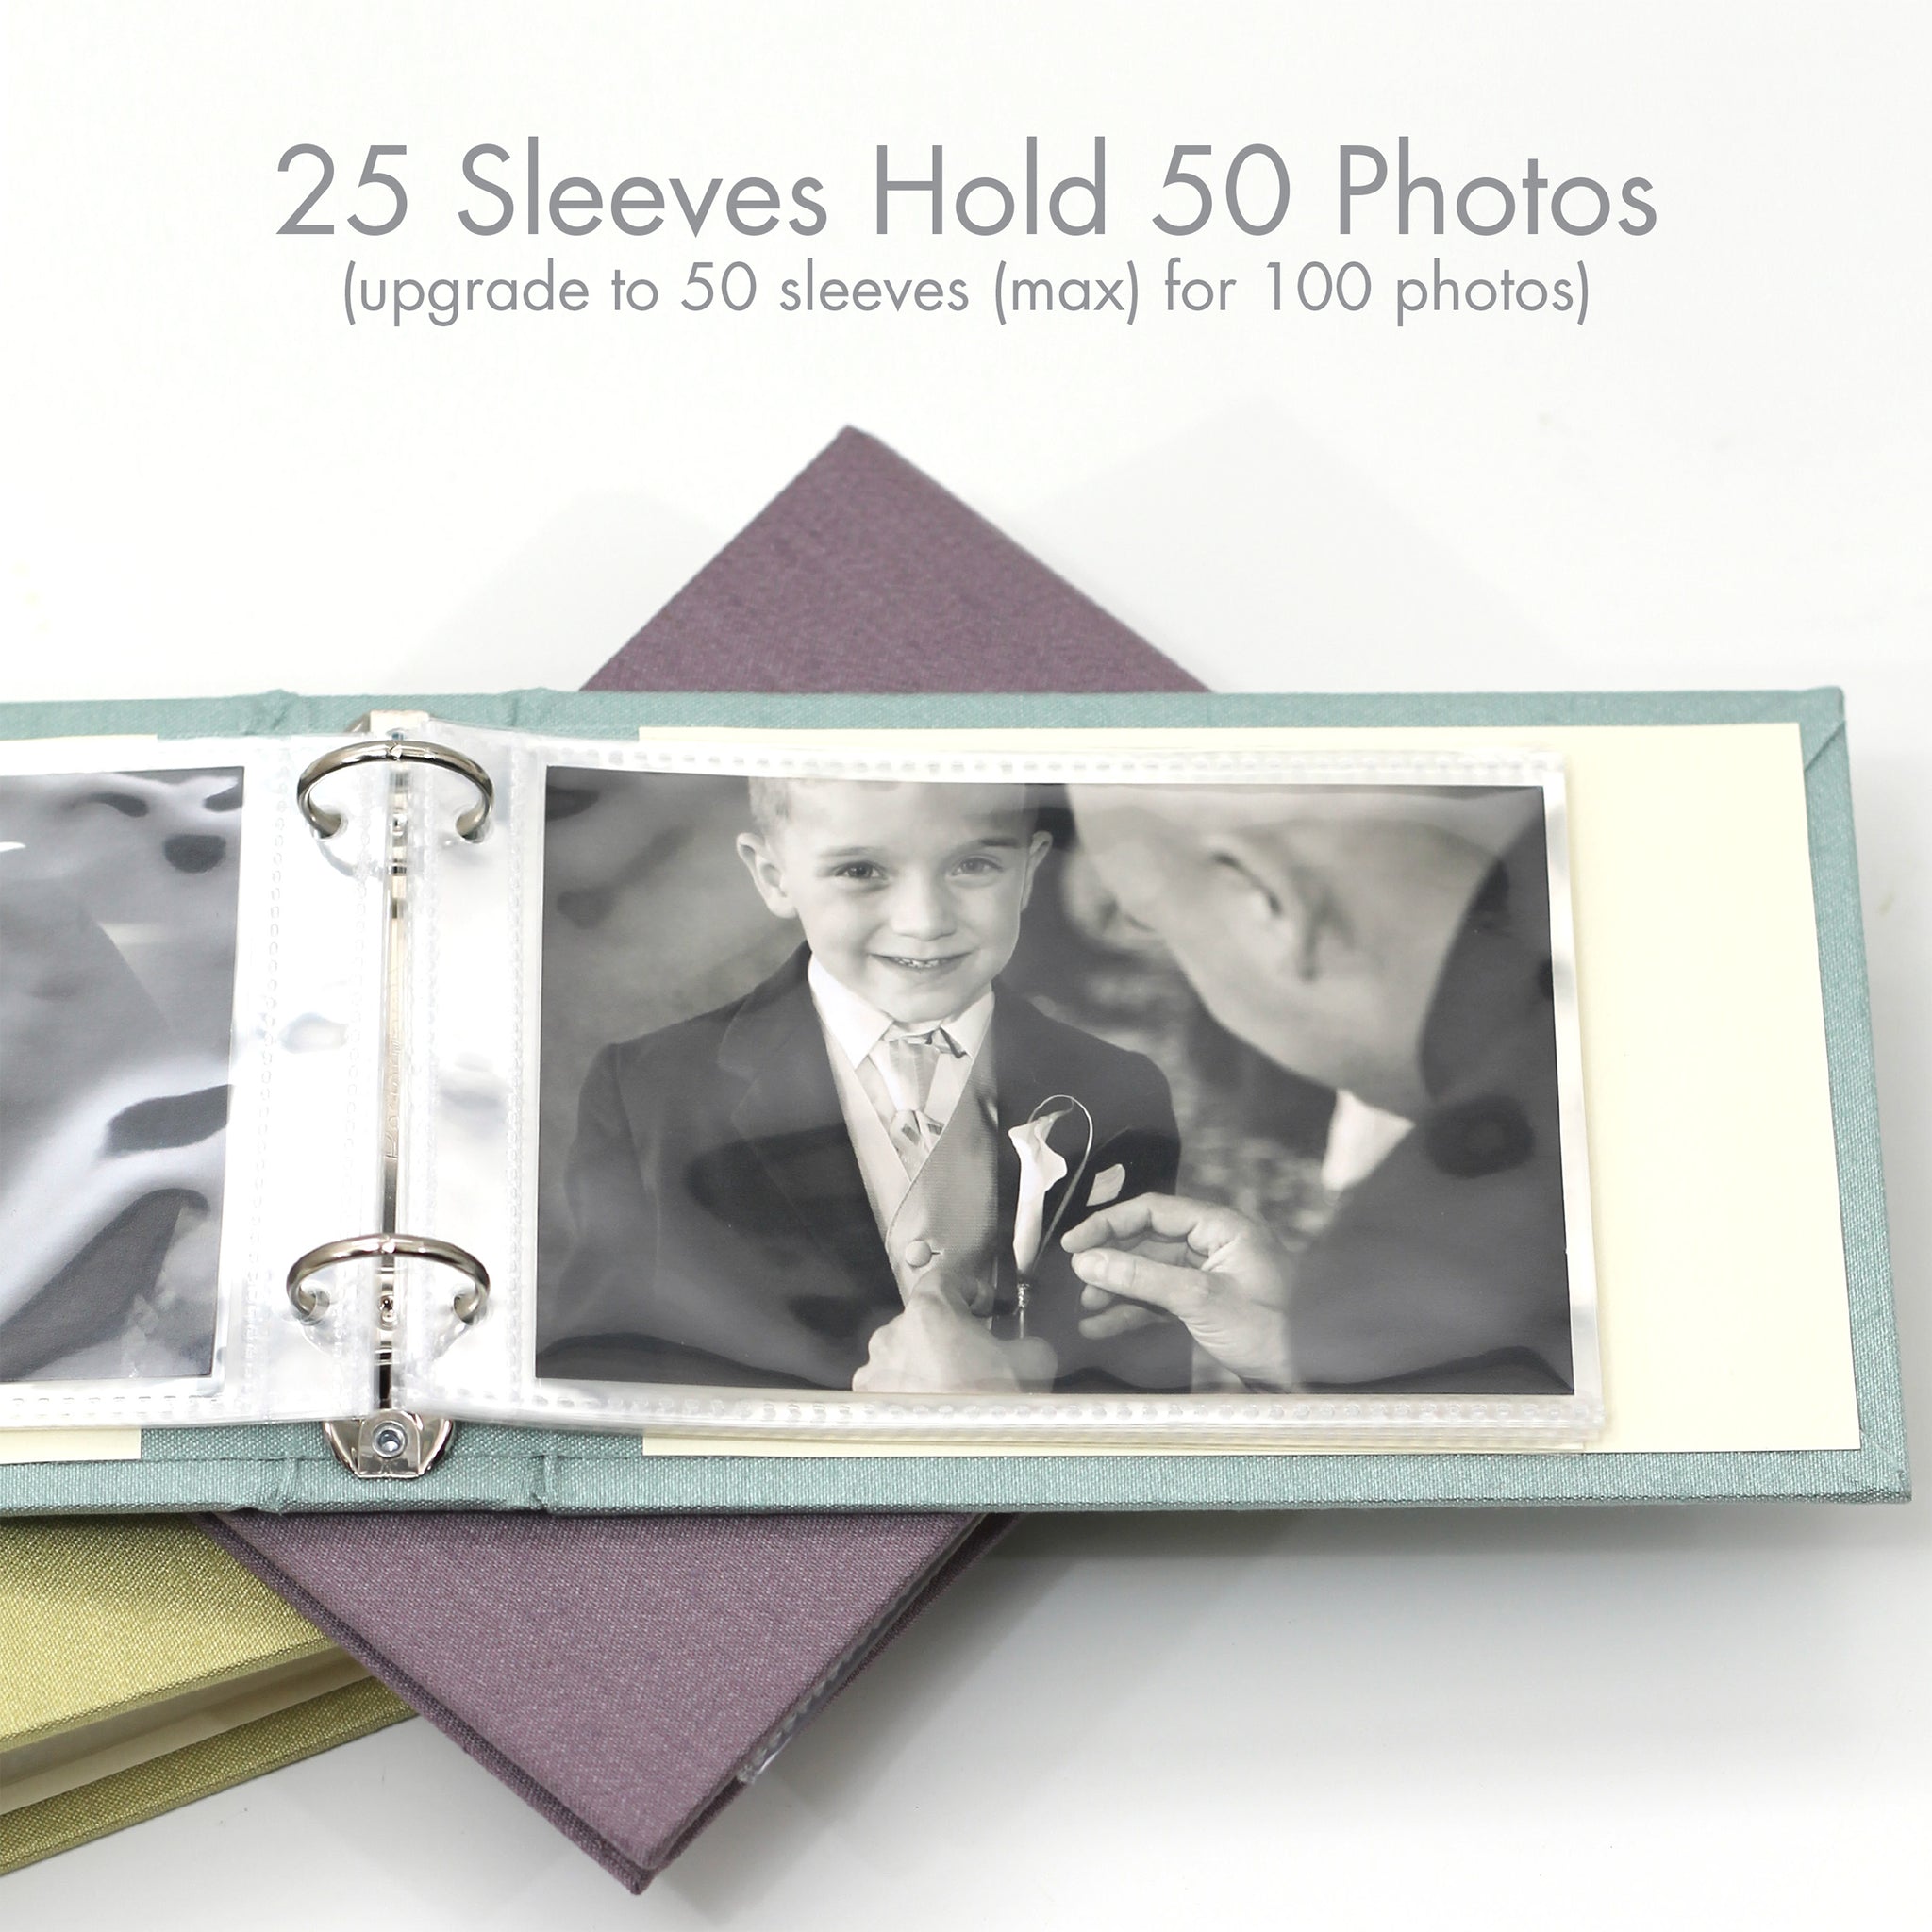 Small Photo Binder, for 4x6 Photos